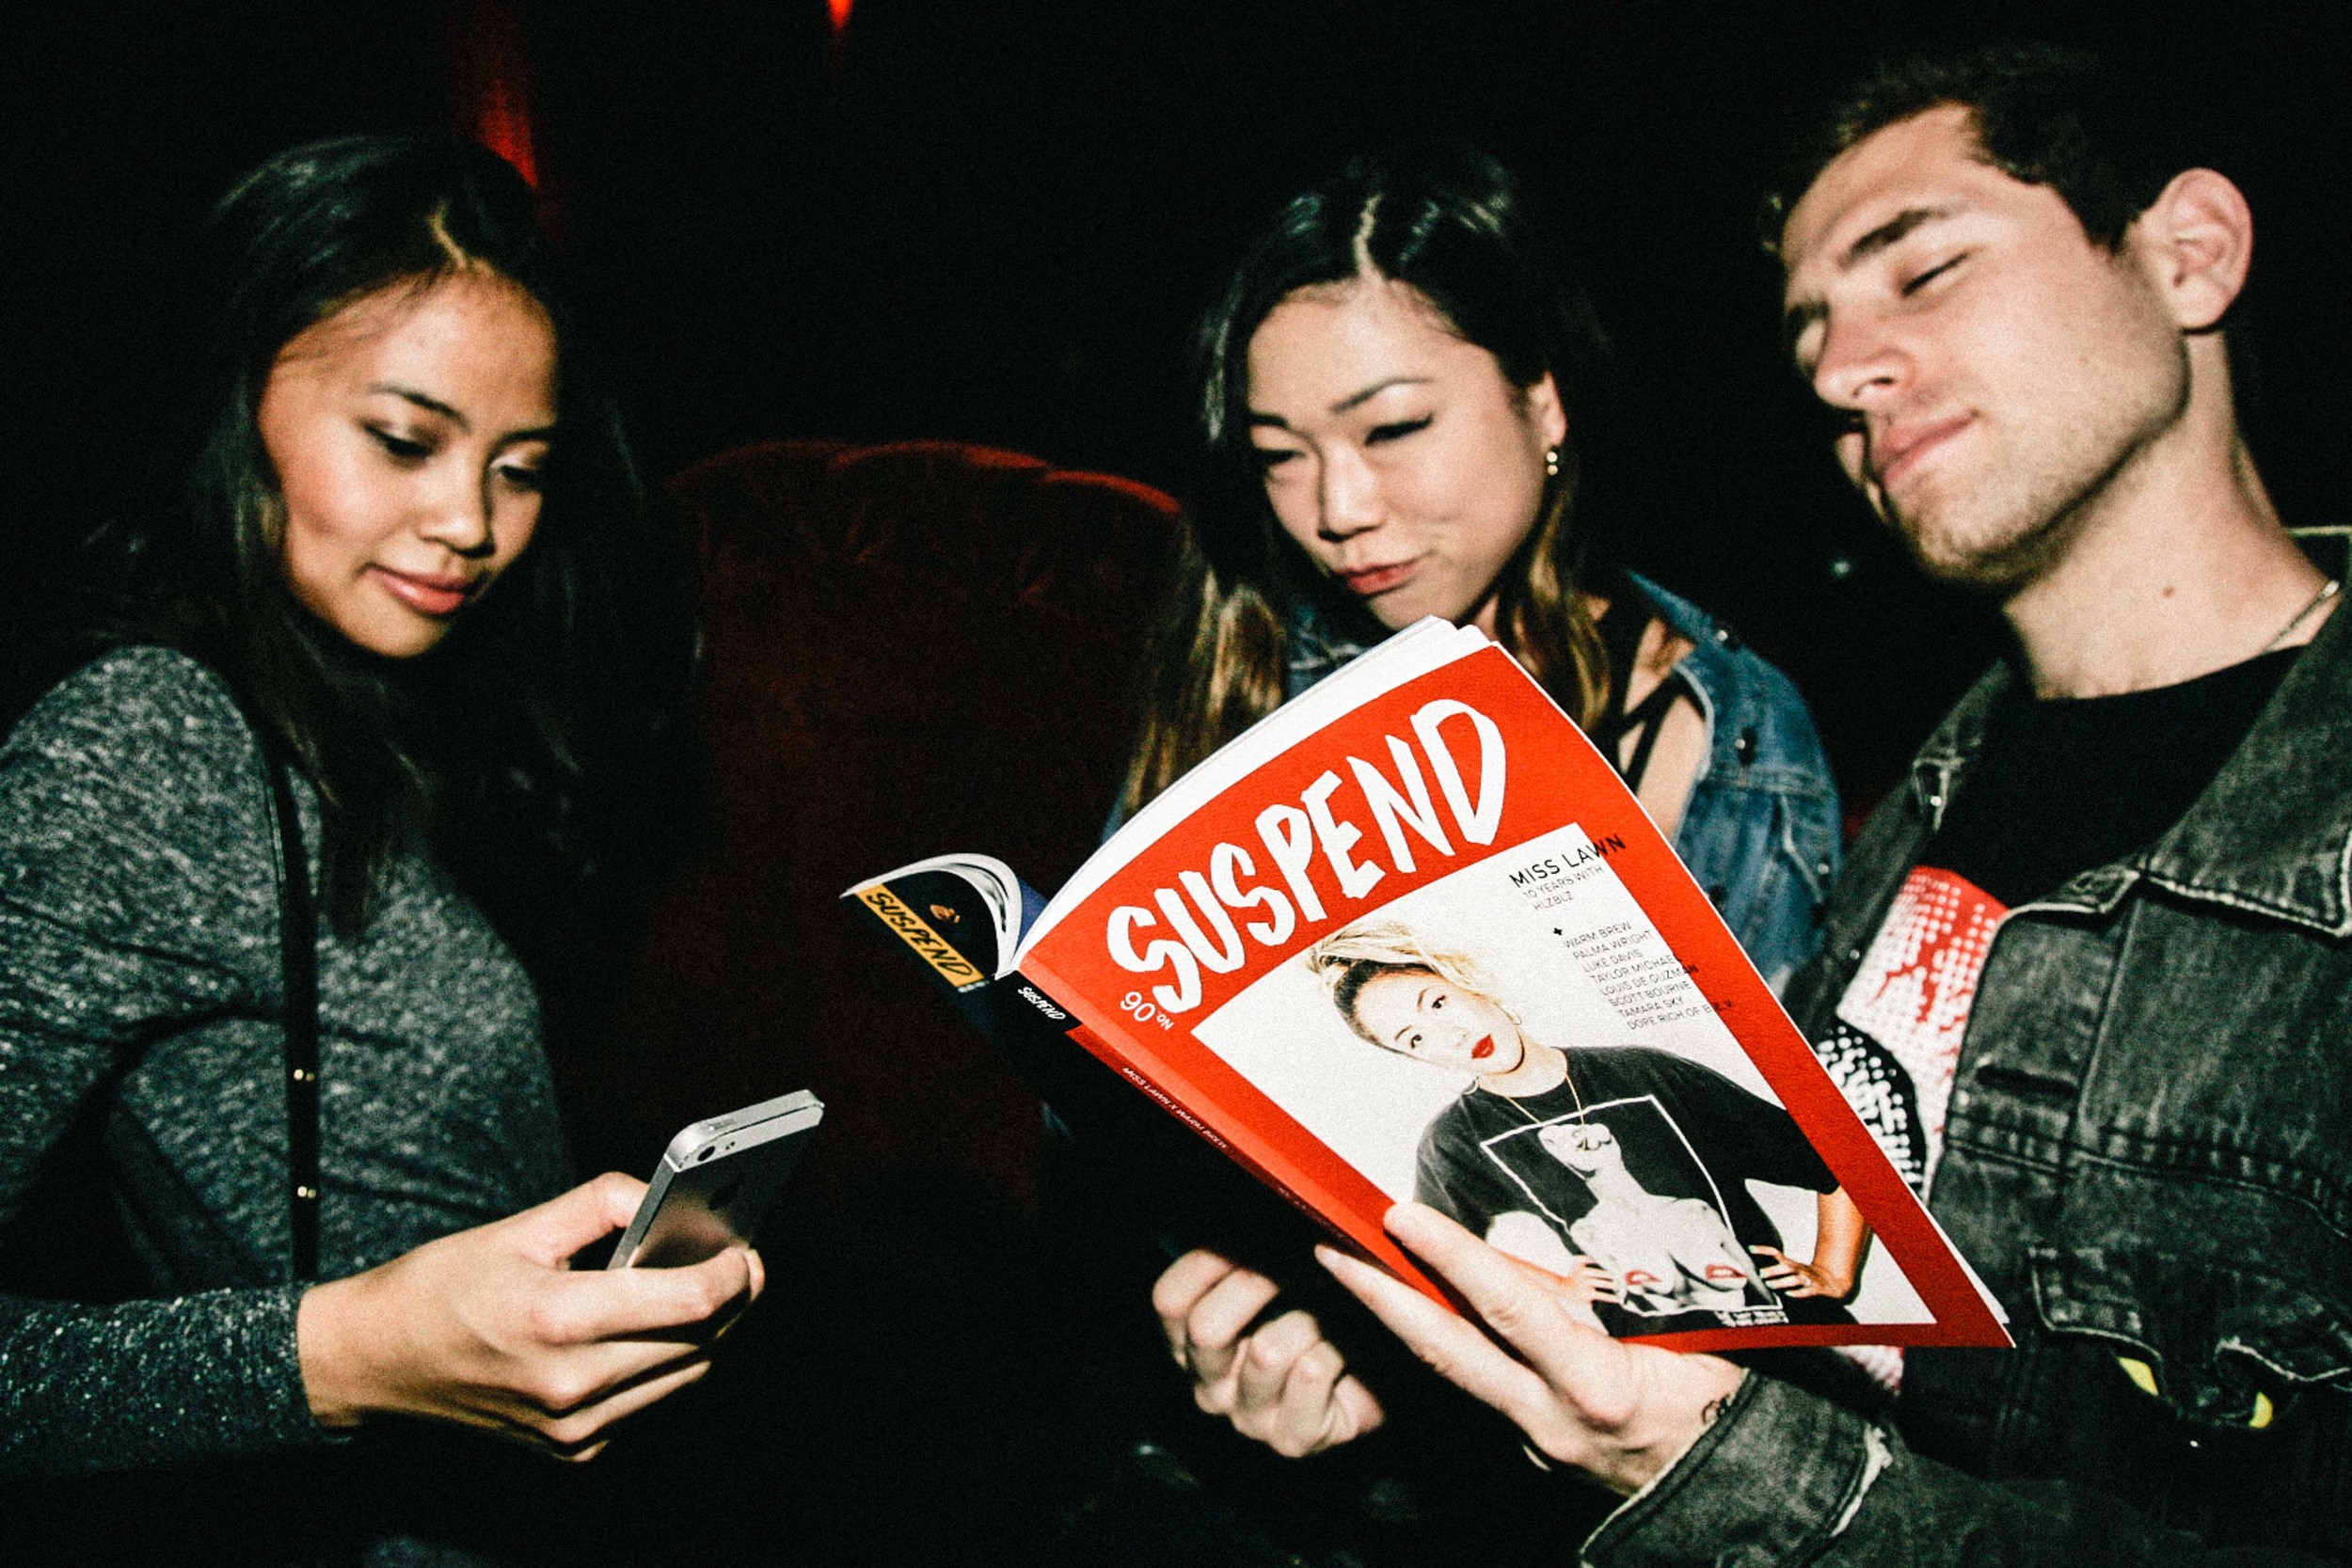  Guests reading ISSUE 06 at the ISSUE 06 Release Party x 10YR HLZBLZ Anniversary (Feb 11) at Globe Theater. / Photo: © Jonathan Tate for SUSPEND Magazine. 